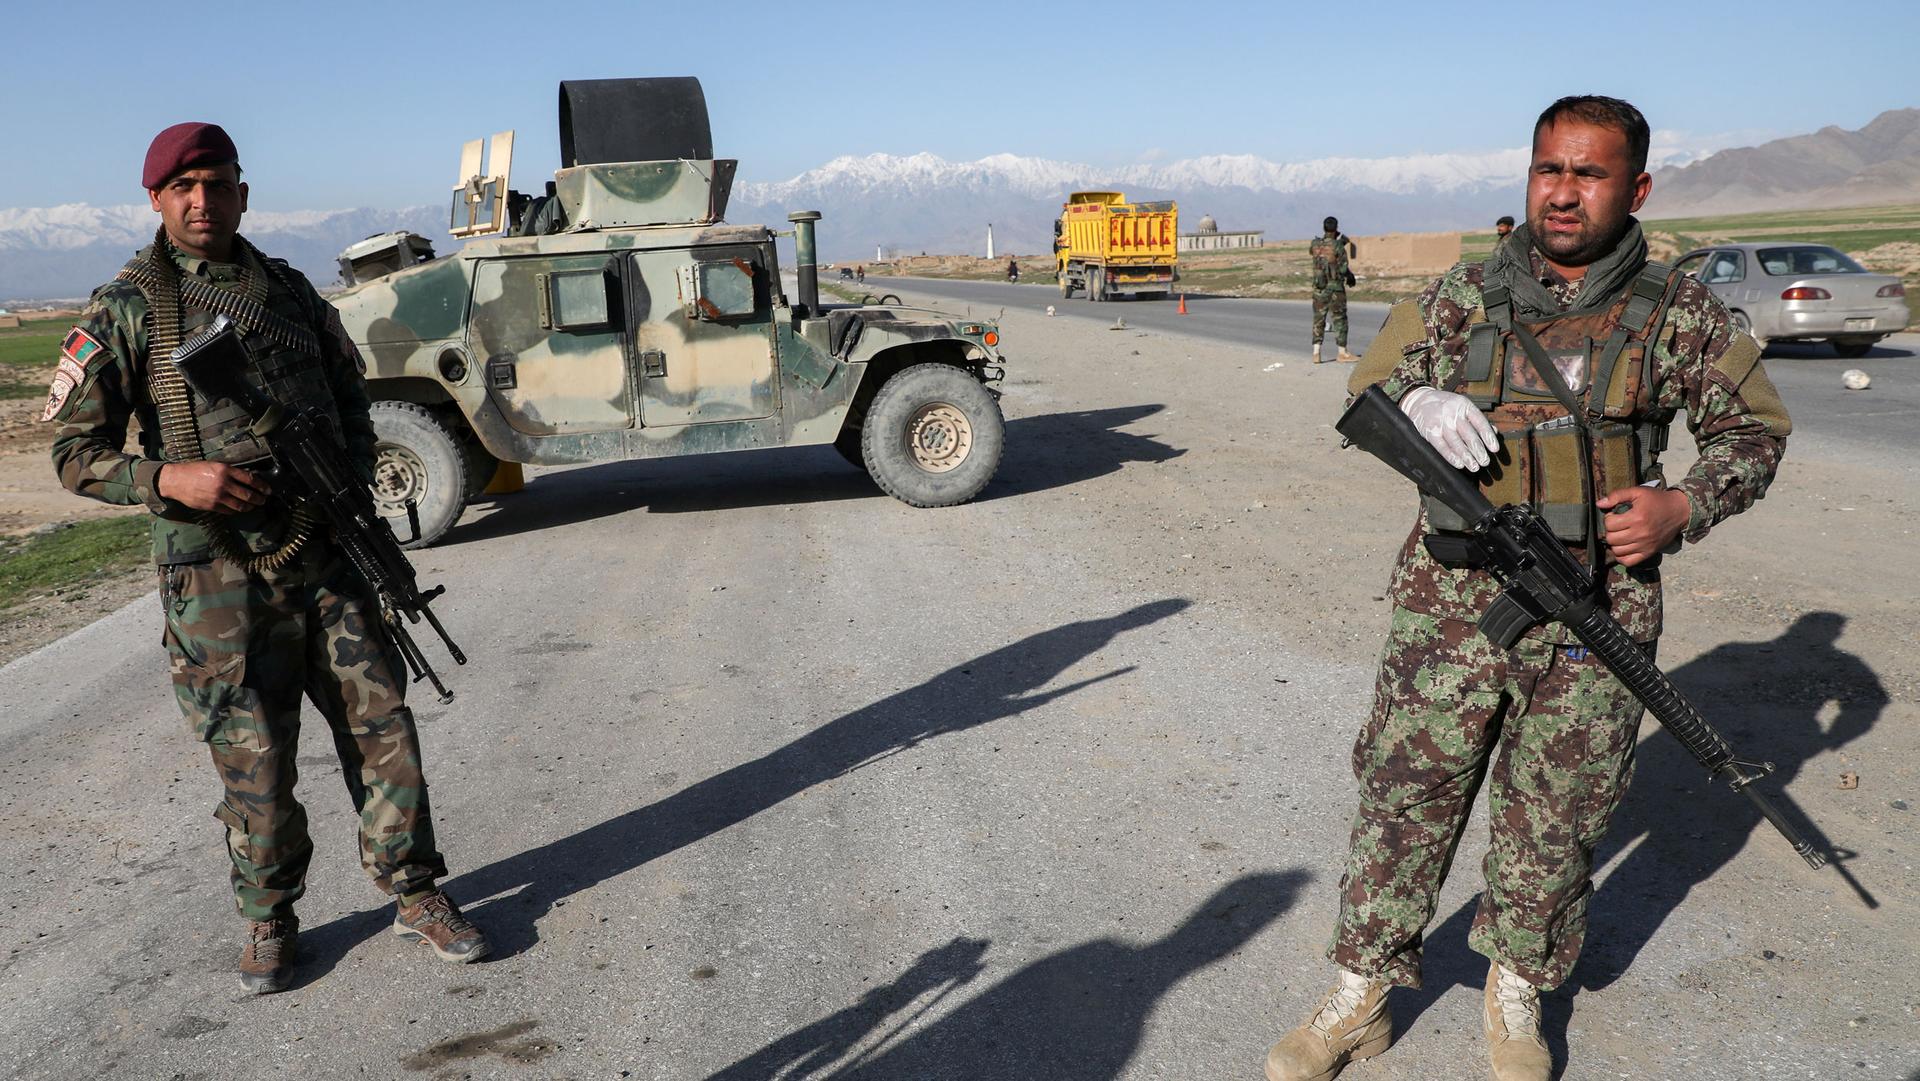 Two soldiers are shown standing near a road and holding weapons with an armored vehicle parked behind them.